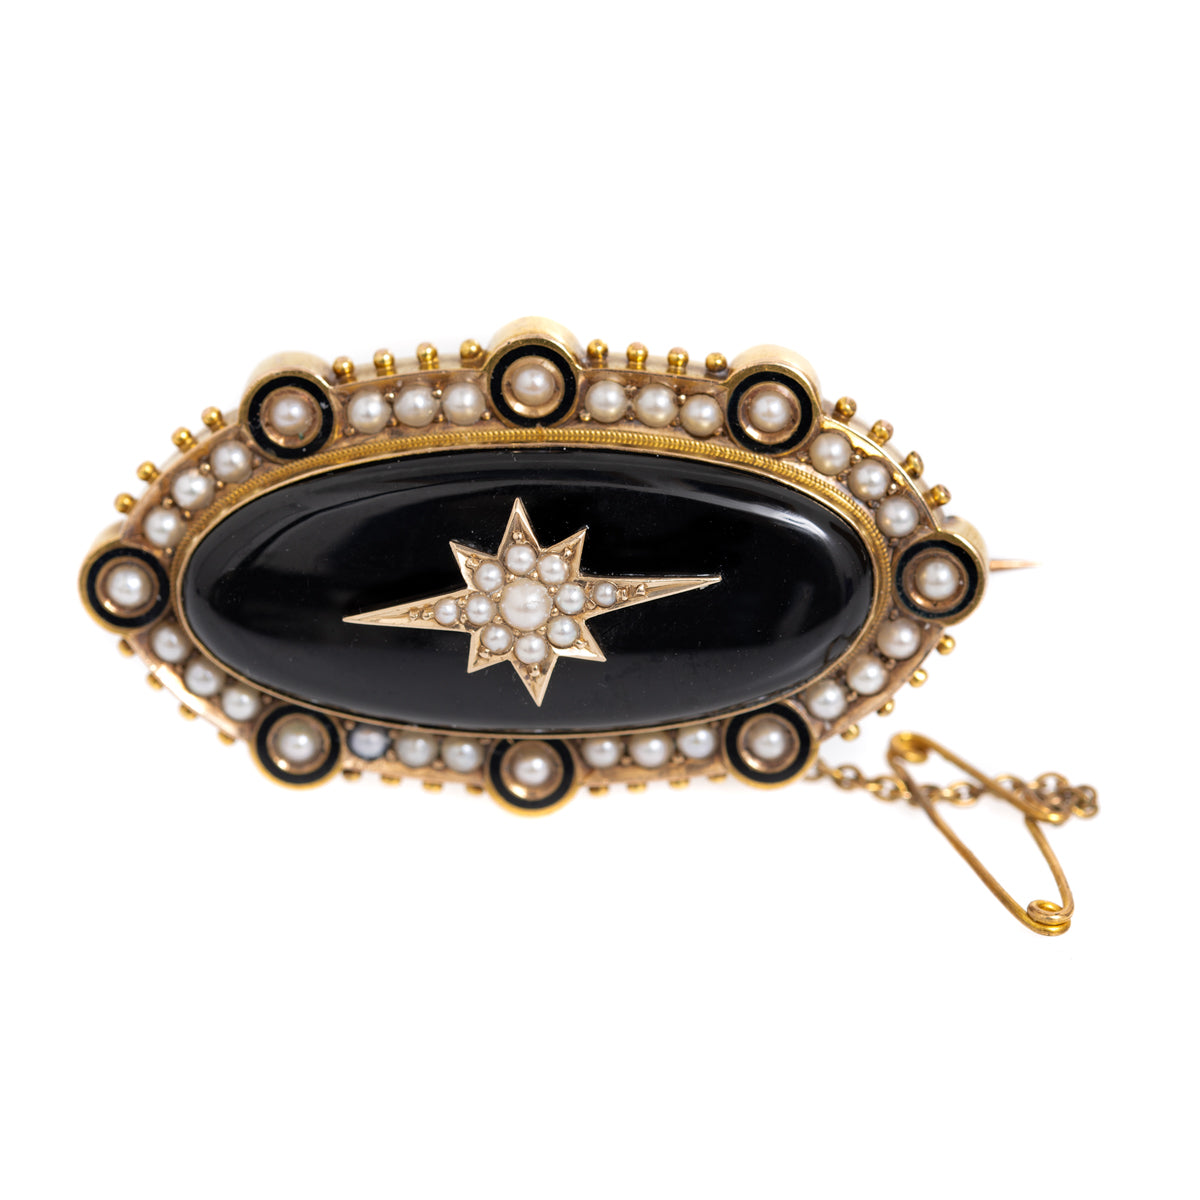 Antique Victorian 18ct Gold, Pearl & Black Onyx Mourning Brooch c.1870 (Code A1061)